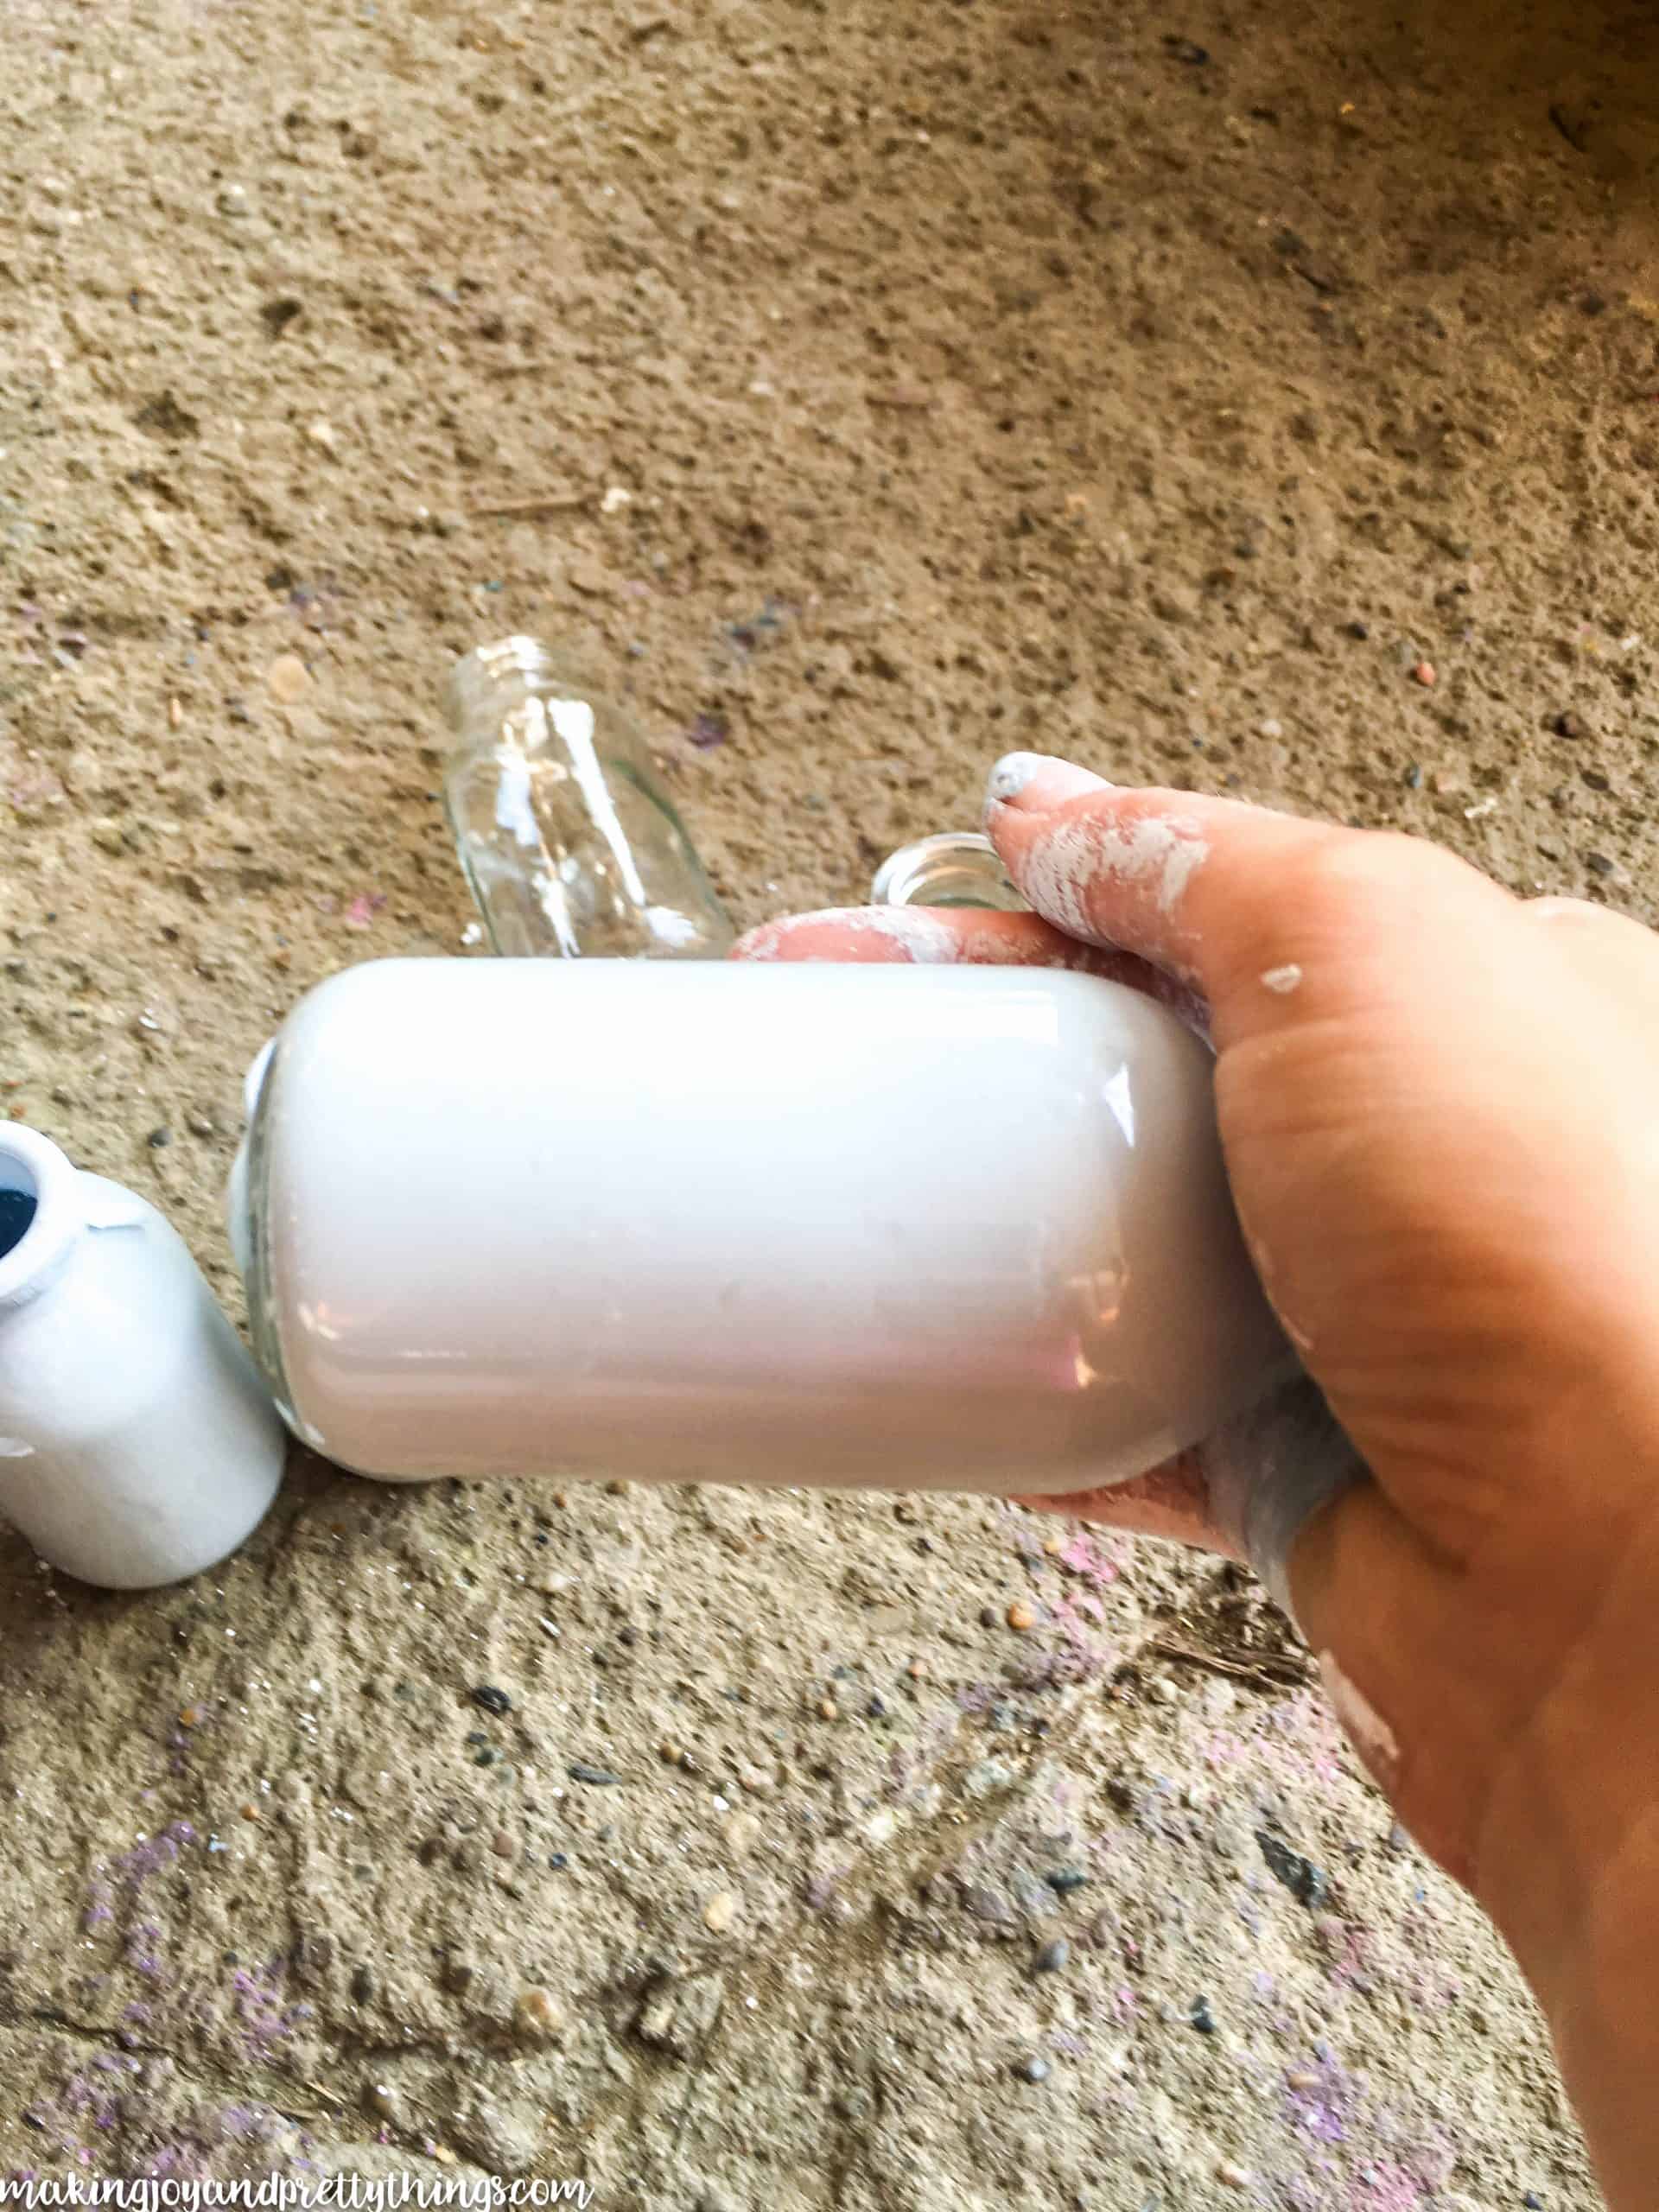 A paint-covered hand holds a glass jar, filled with white paint. The paint coats the inside of the jar, making it opaque.